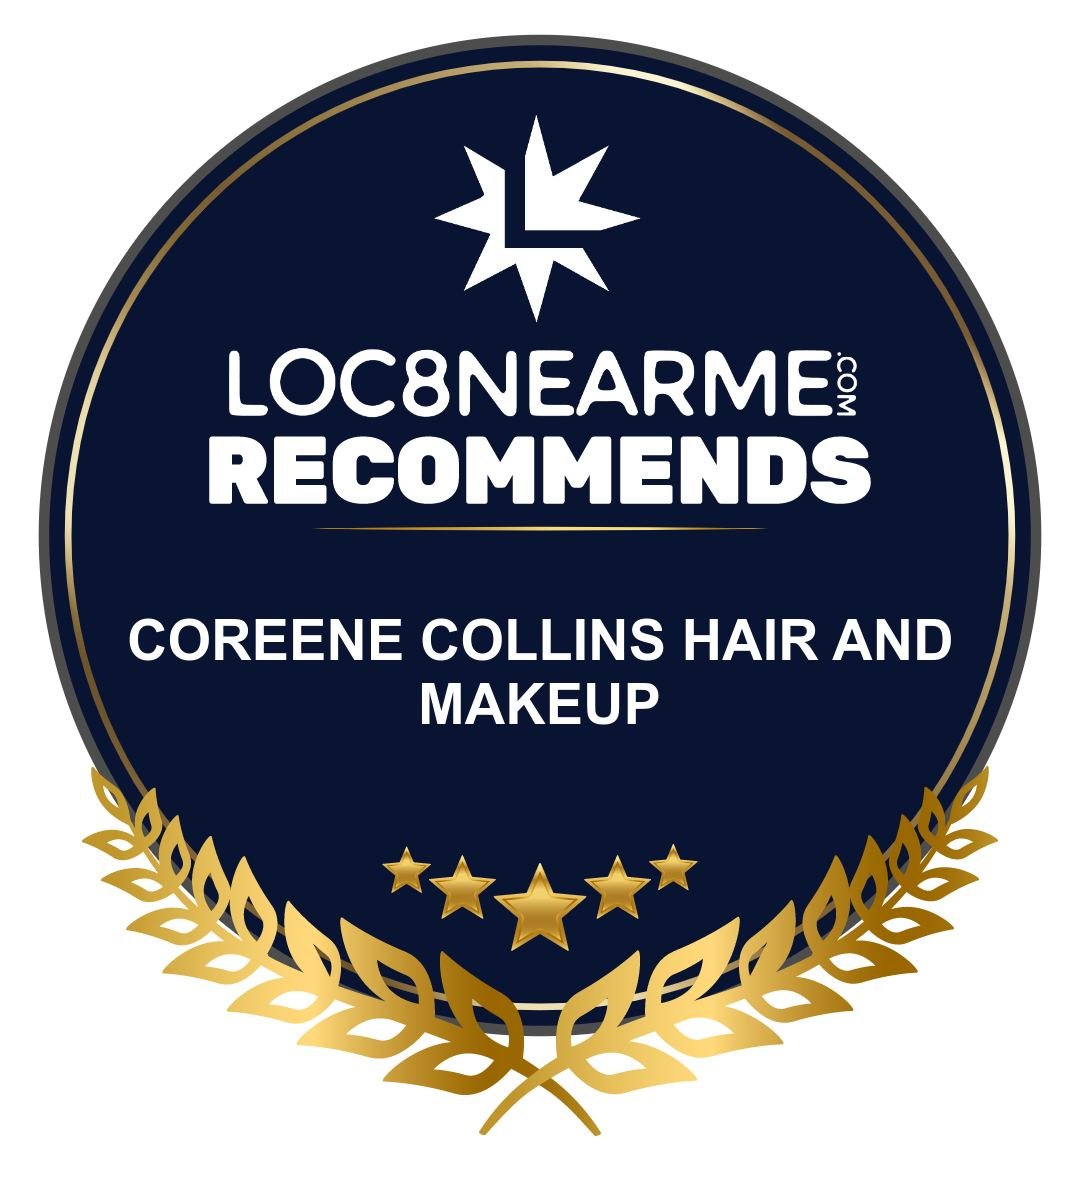 LOC8NEARME RECOMMENDS COREENE COLLINS HAIR AND MAKEUP